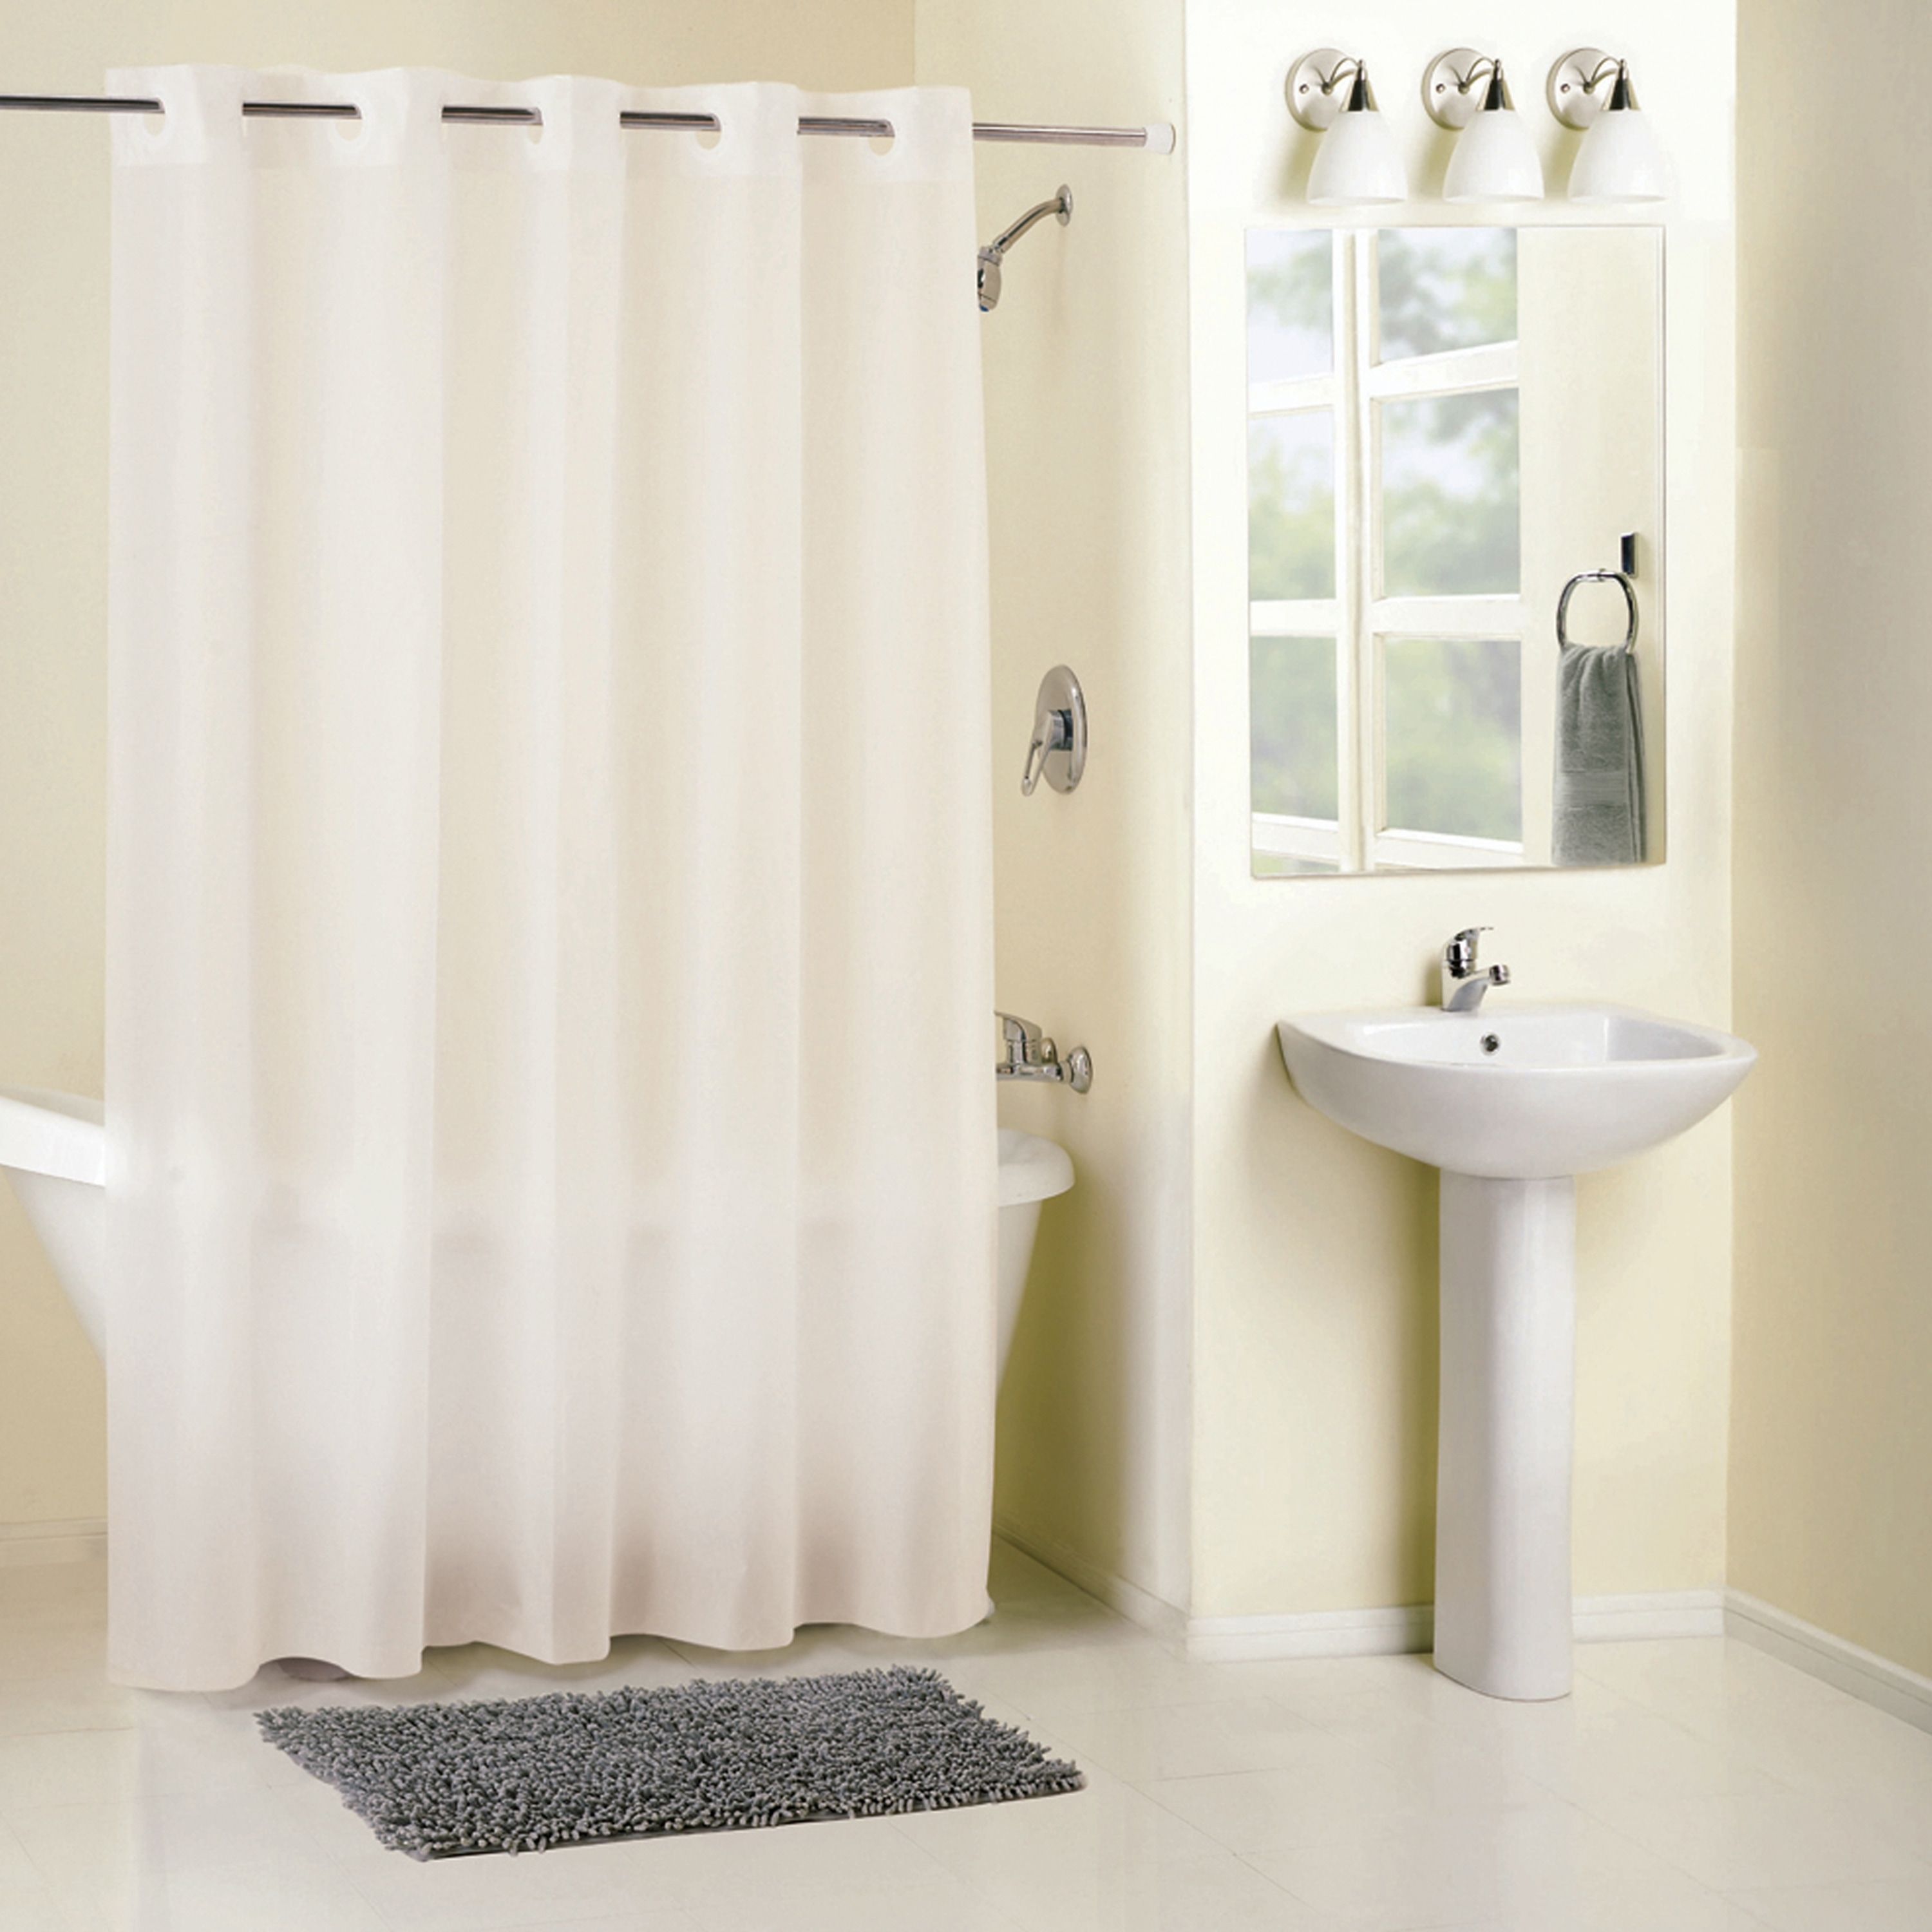 https://ak1.ostkcdn.com/images/products/is/images/direct/321913494a87cf36f99f0901a55b17eacdc42ee0/Hookless-Peva-Shower-Curtain.jpg